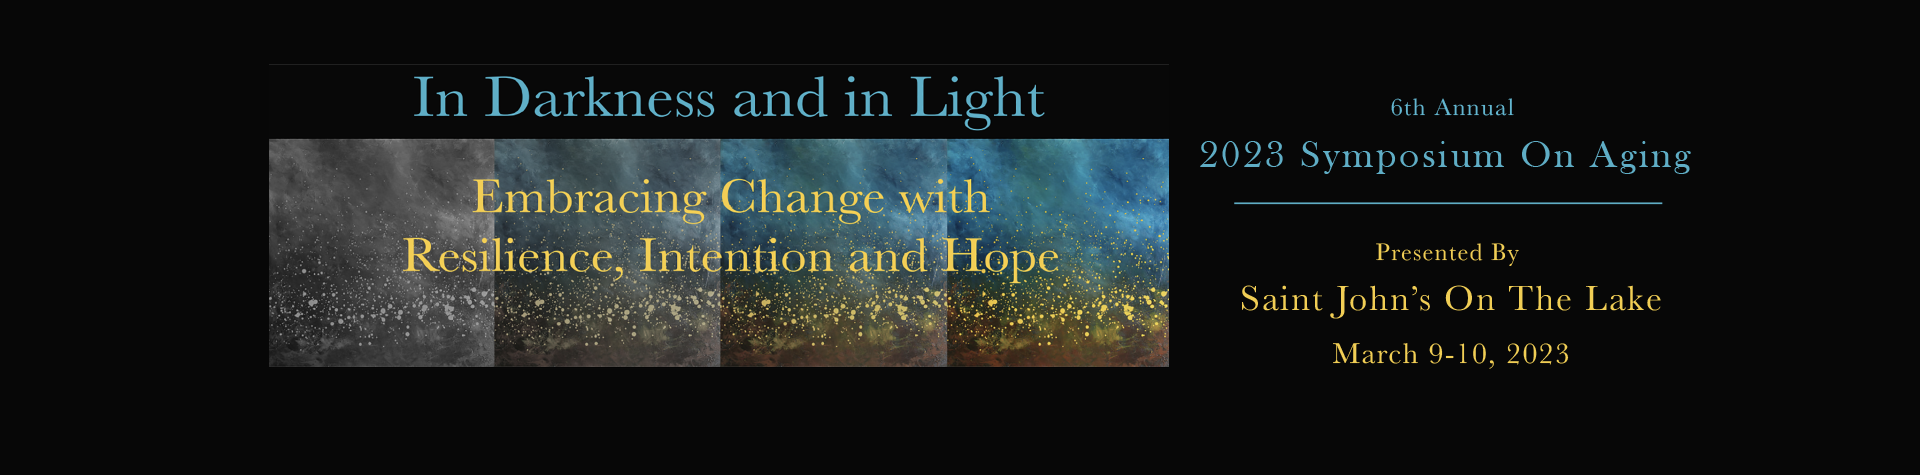 Symposium On Aging<br /> In Darkness and in Light | March 9-10, 2023